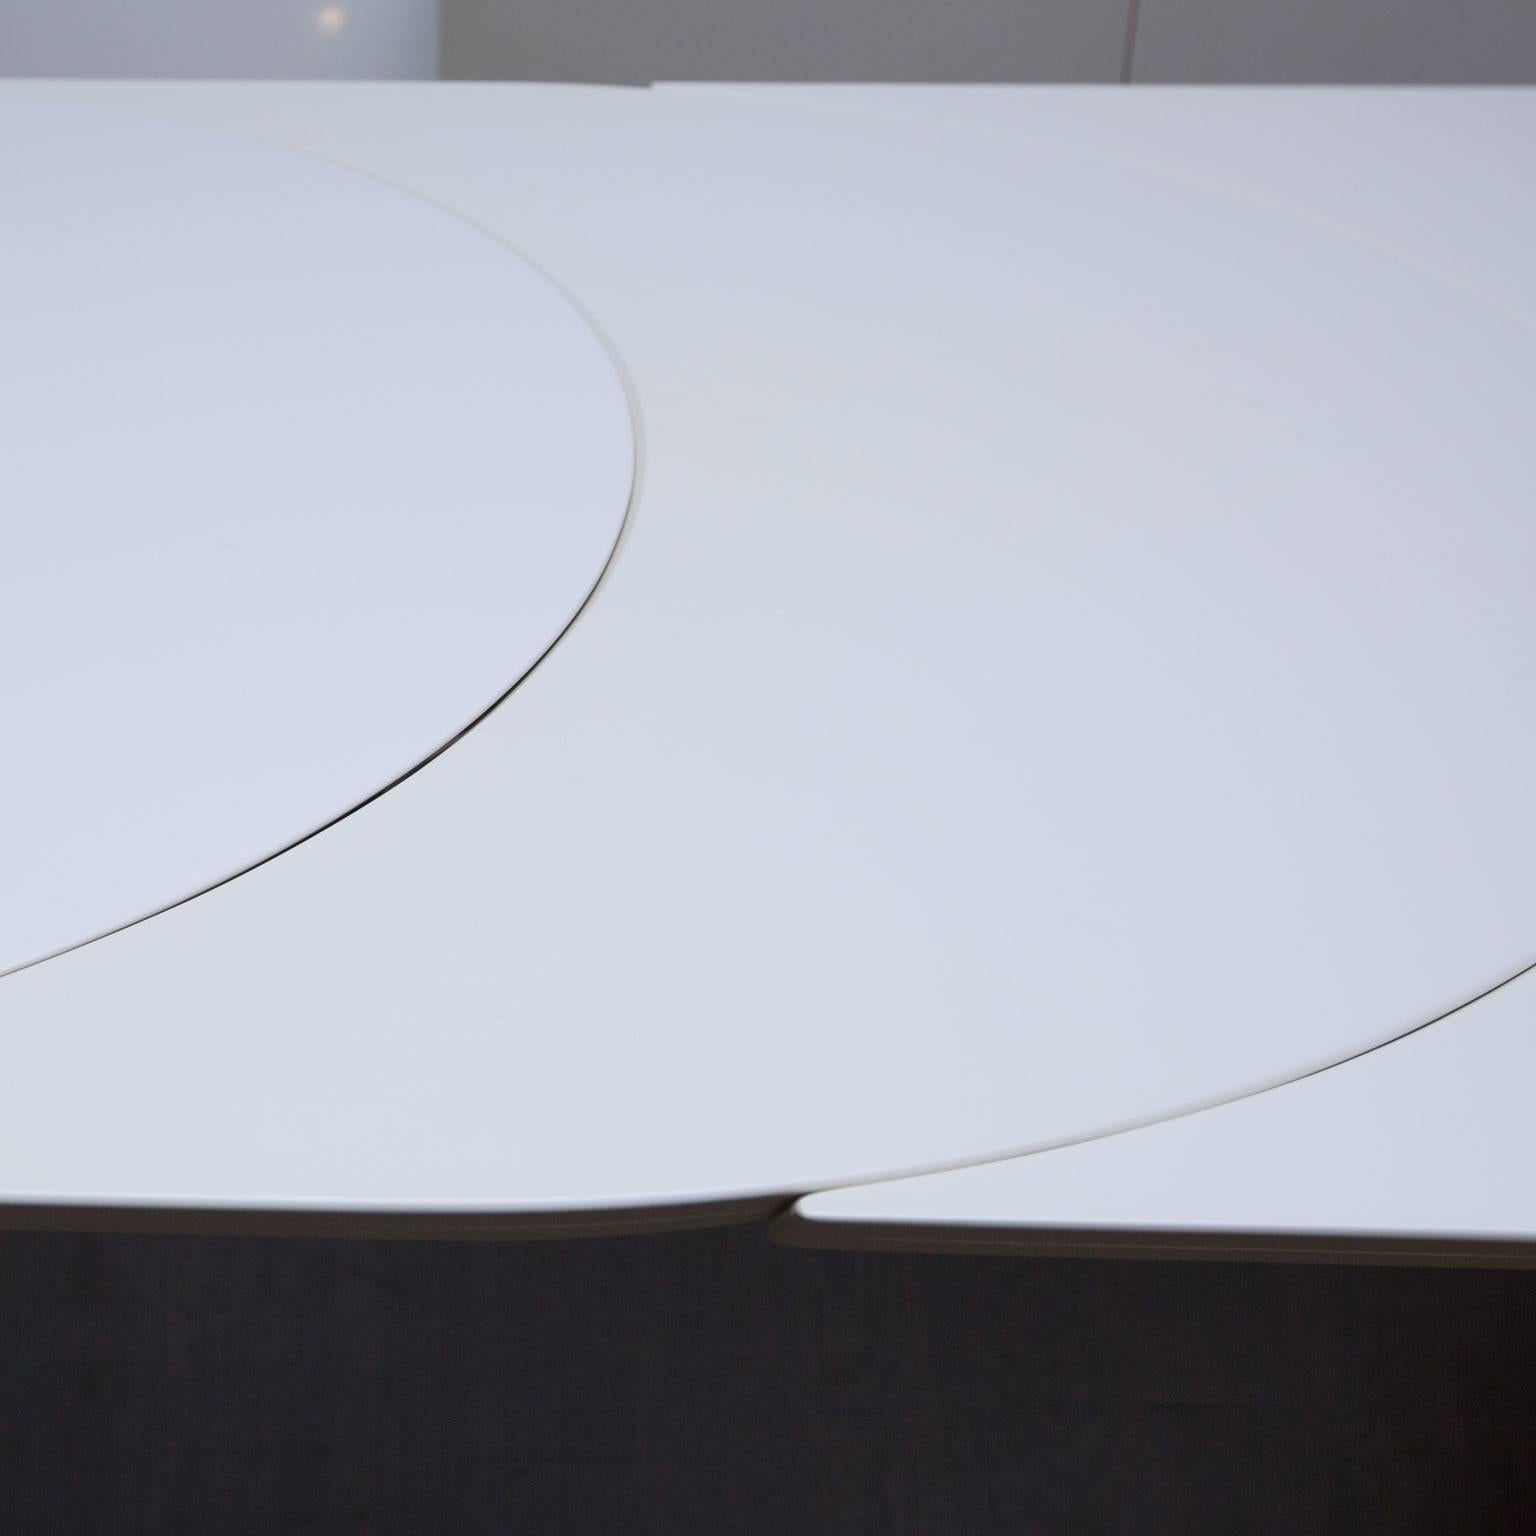 This is a really cool designed extension table by Roger Rougier consisting of a round pedestal base and curved end that rides on castors so table can move sideways with ease. Using the crescent shaped leaf the table extends an additional 18 inches.